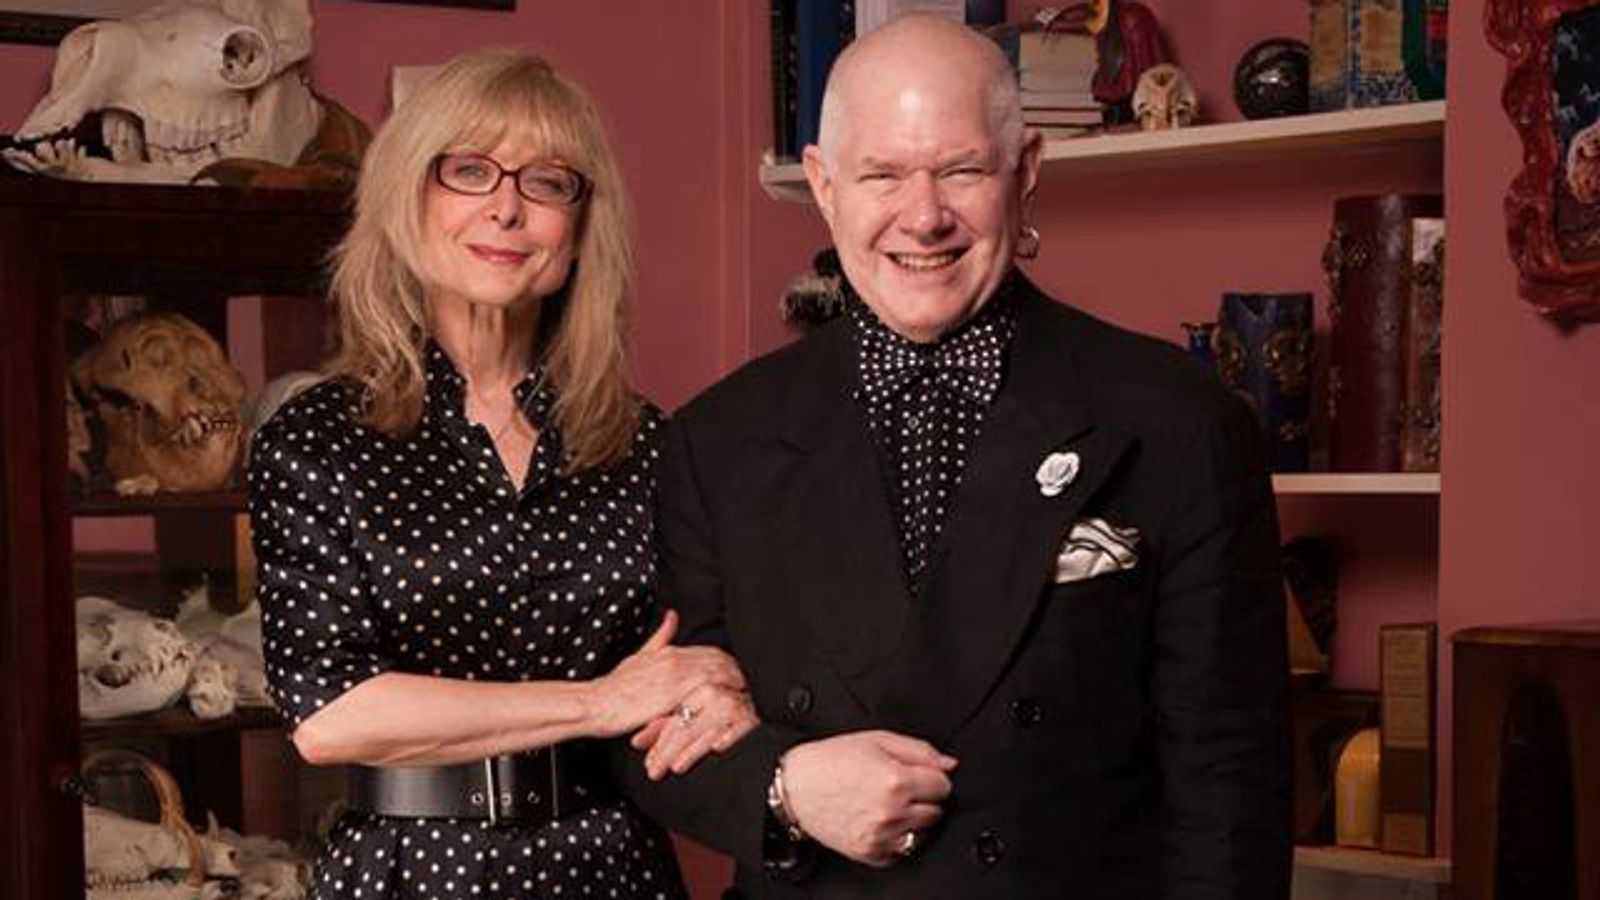 Invitation to An Evening with 'The Master of O' and Nina Hartley